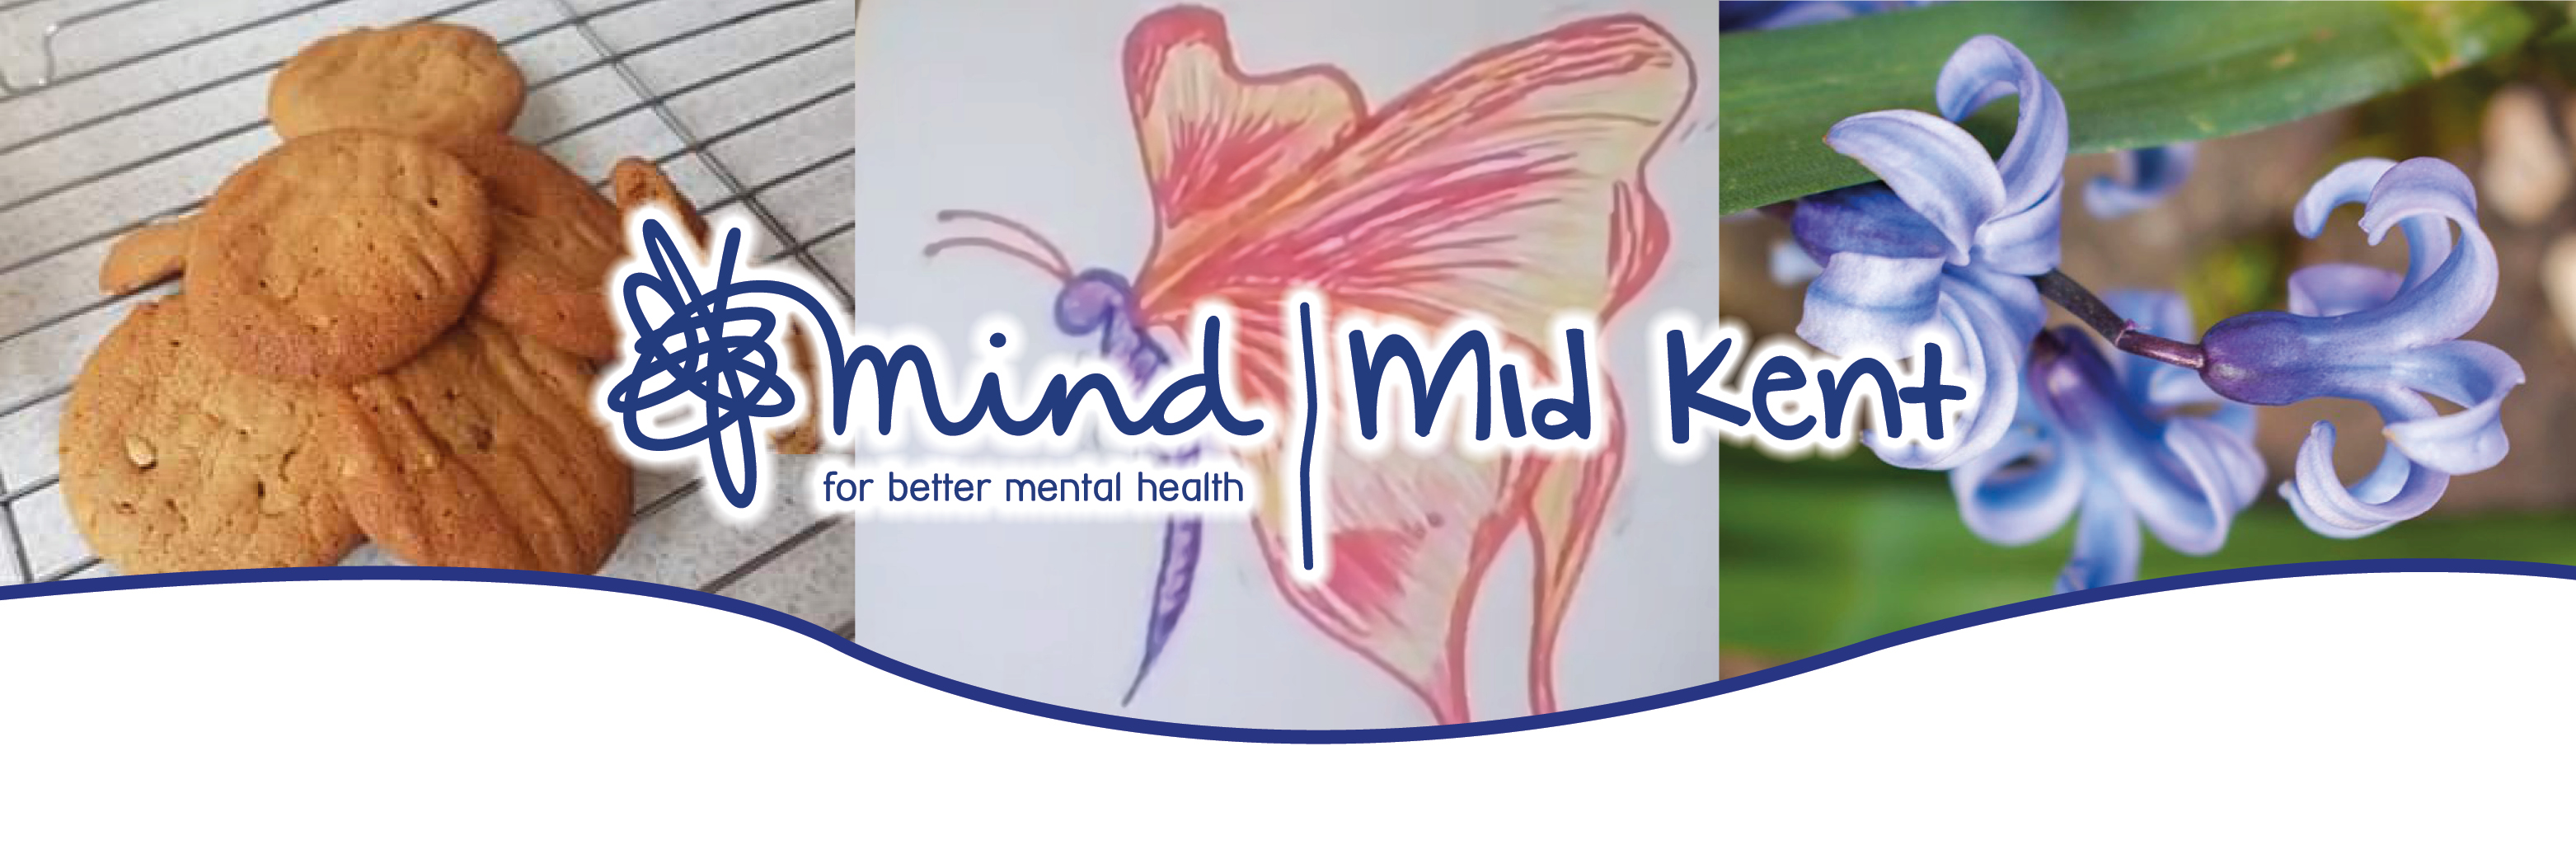 Banner featuring images of community groups and Mid-Kent Mind Branding